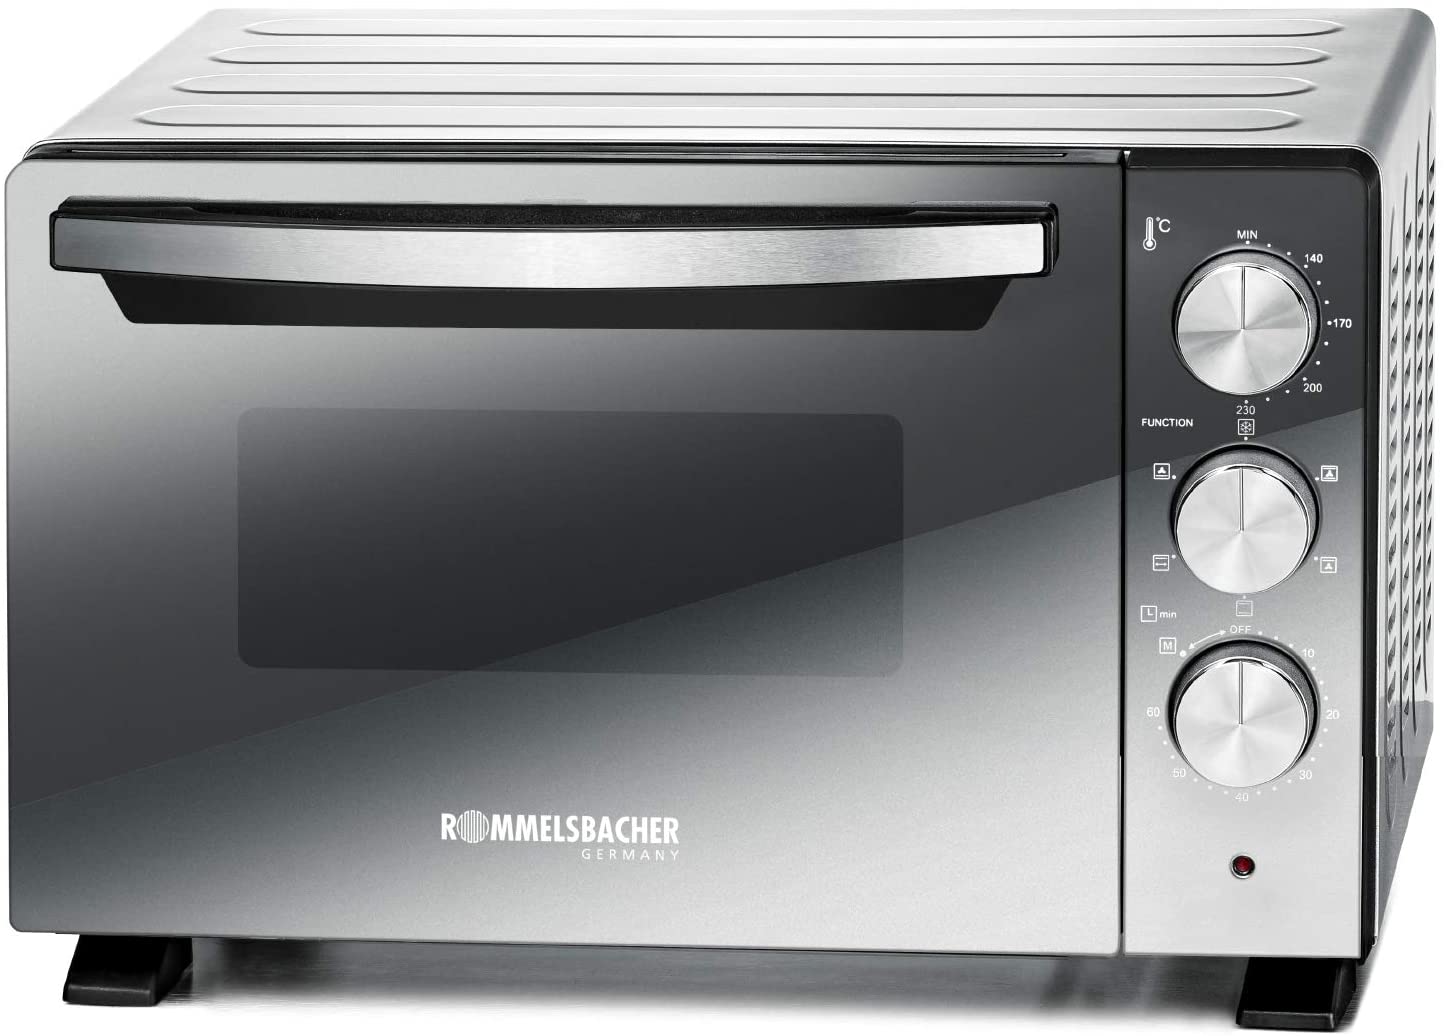 ROMMELSBACHER Back & Grill Oven BGS 1400 - Energy Saving & Efficient, 22 Litre Volume, Non-Stick Baking Chamber, 6 Heat Types, Rotisserie Spit, 60 Minute Timer, Double Glazing, Silver, 1380 W